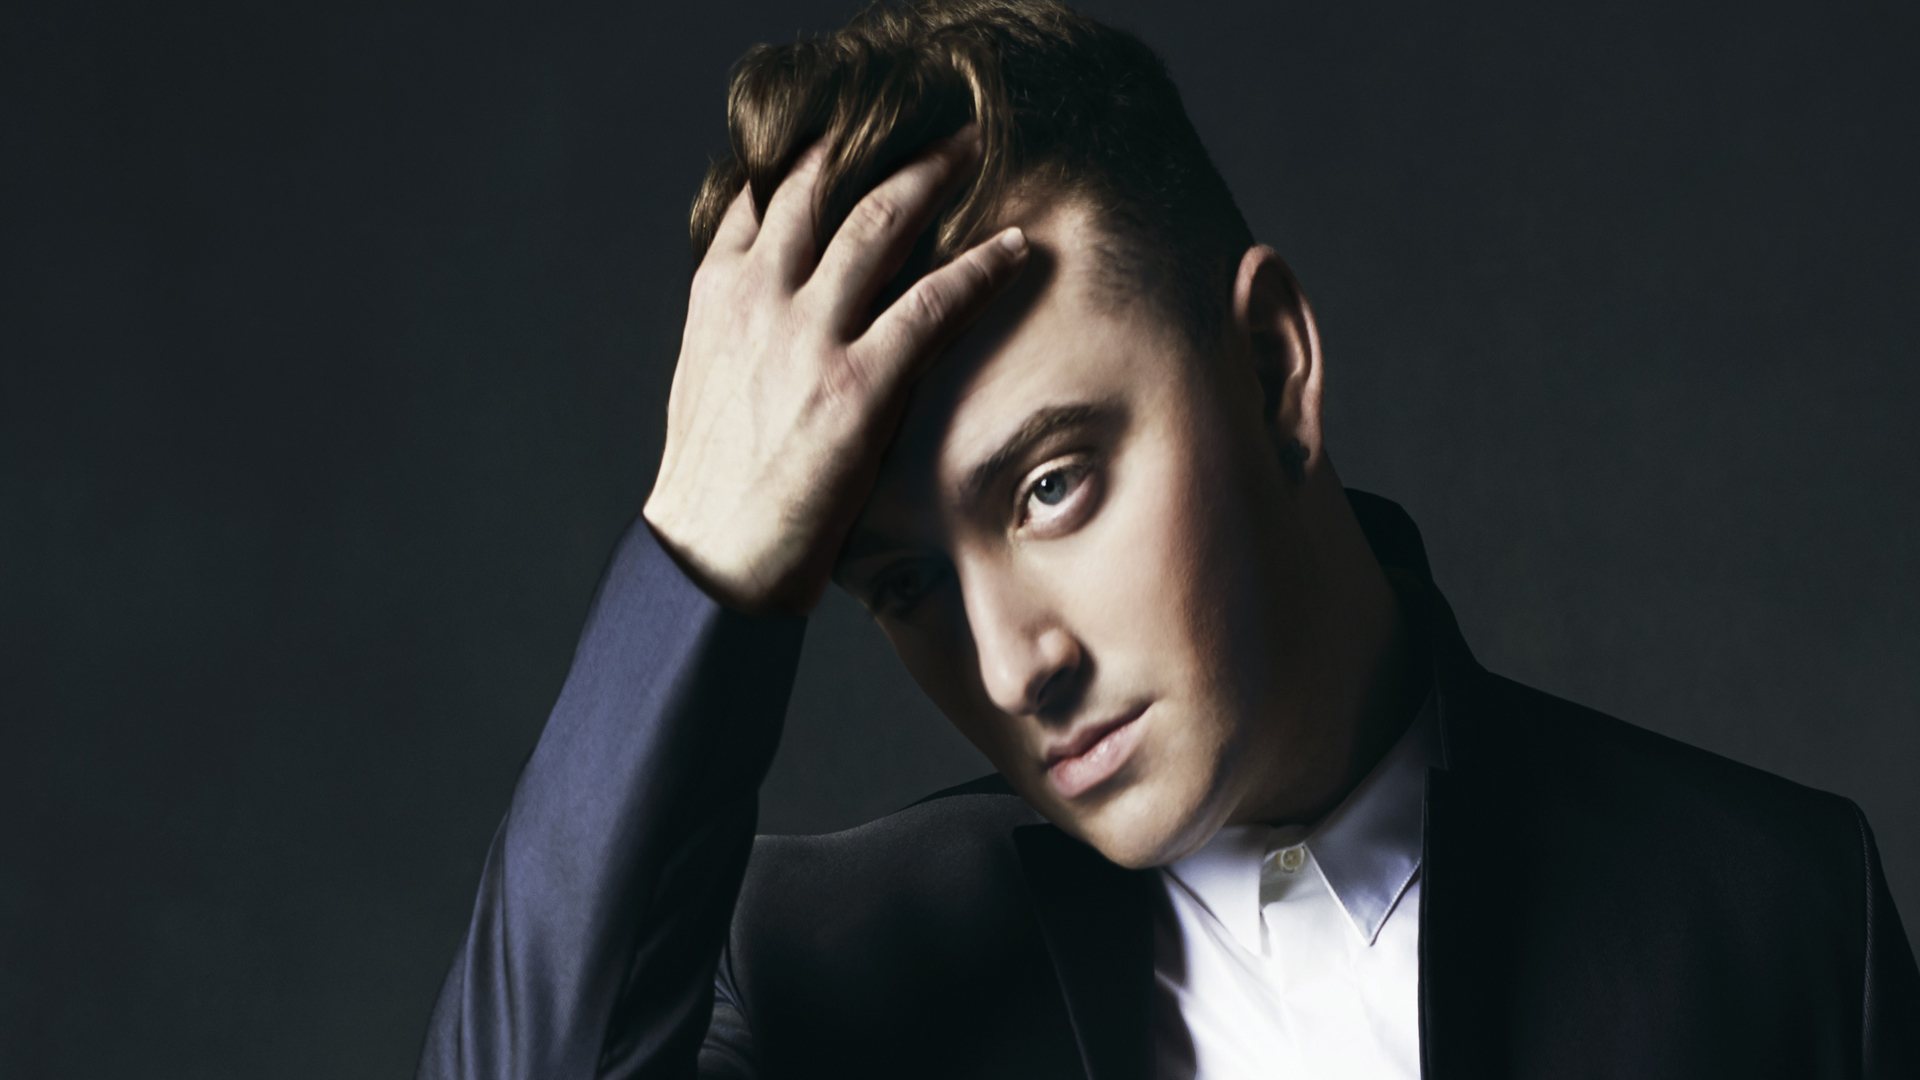 Sam Smith Wallpapers Images Photos Pictures Backgrounds1920 x 1080